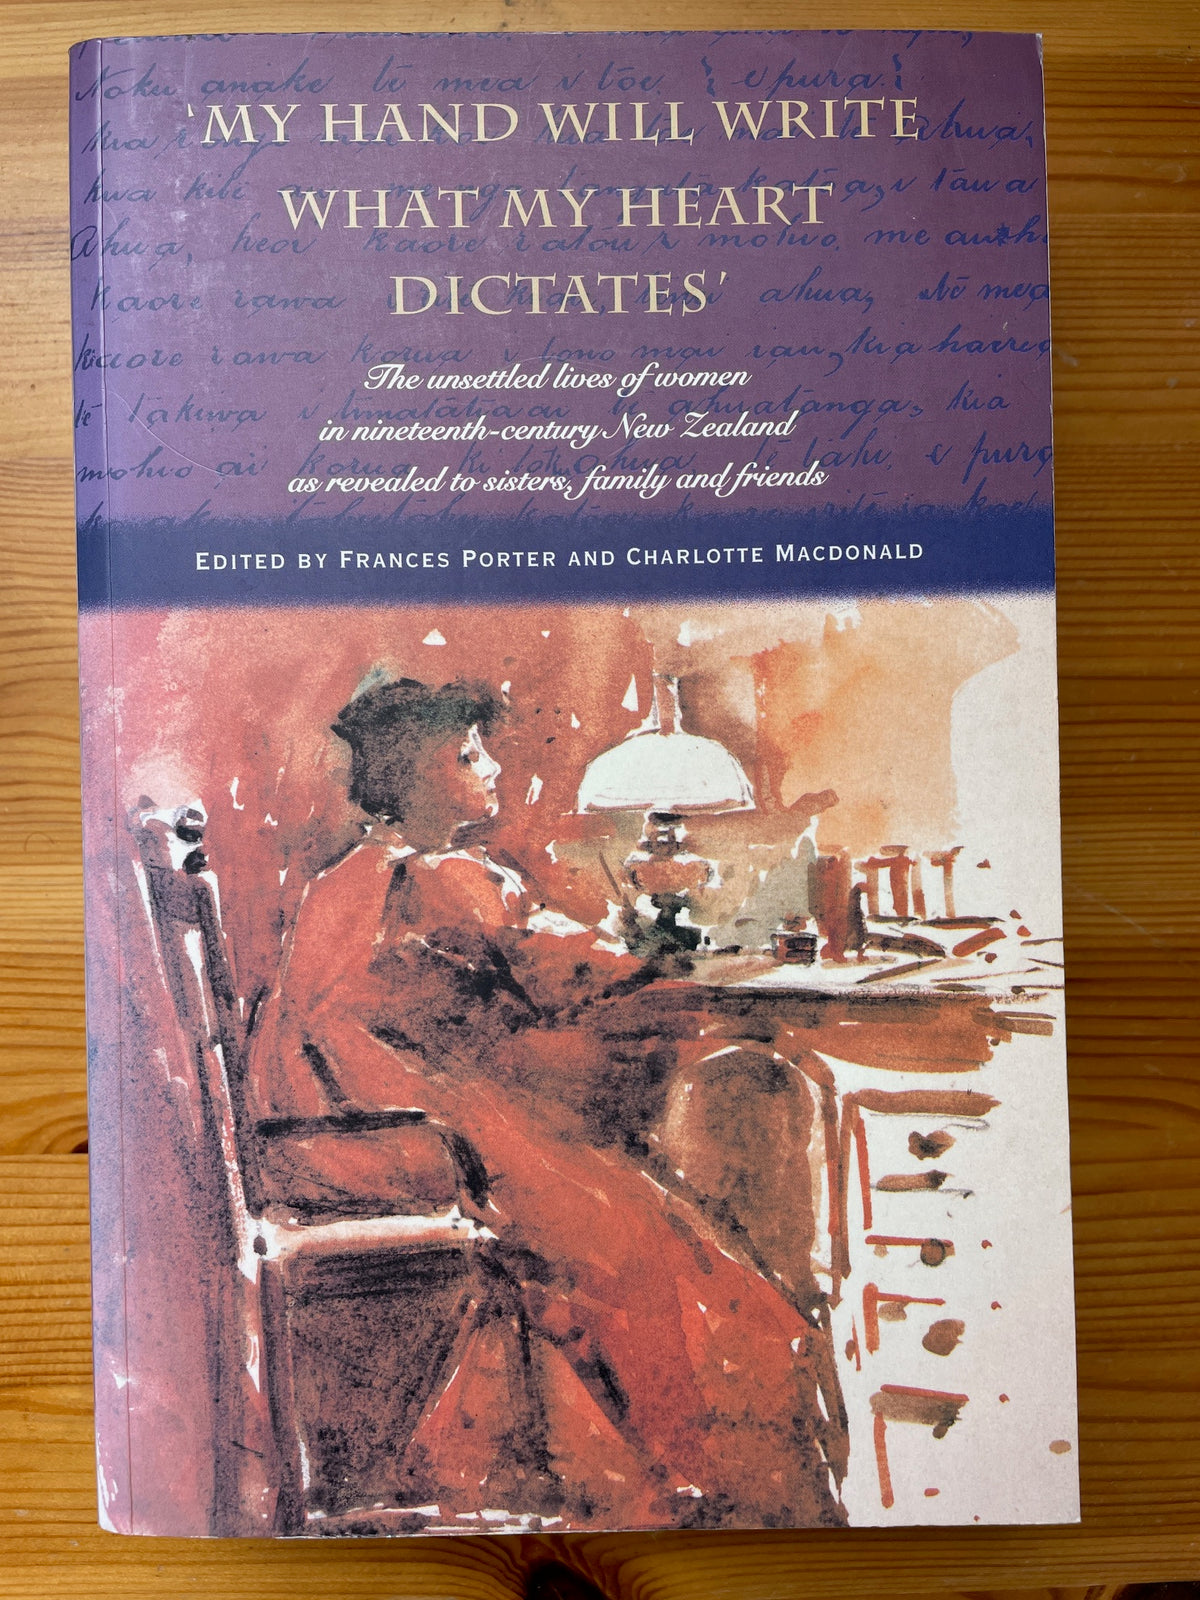 My Hand will Write what my Heart Dictates - Edited by Frances Porter and Charlotte Macdonald